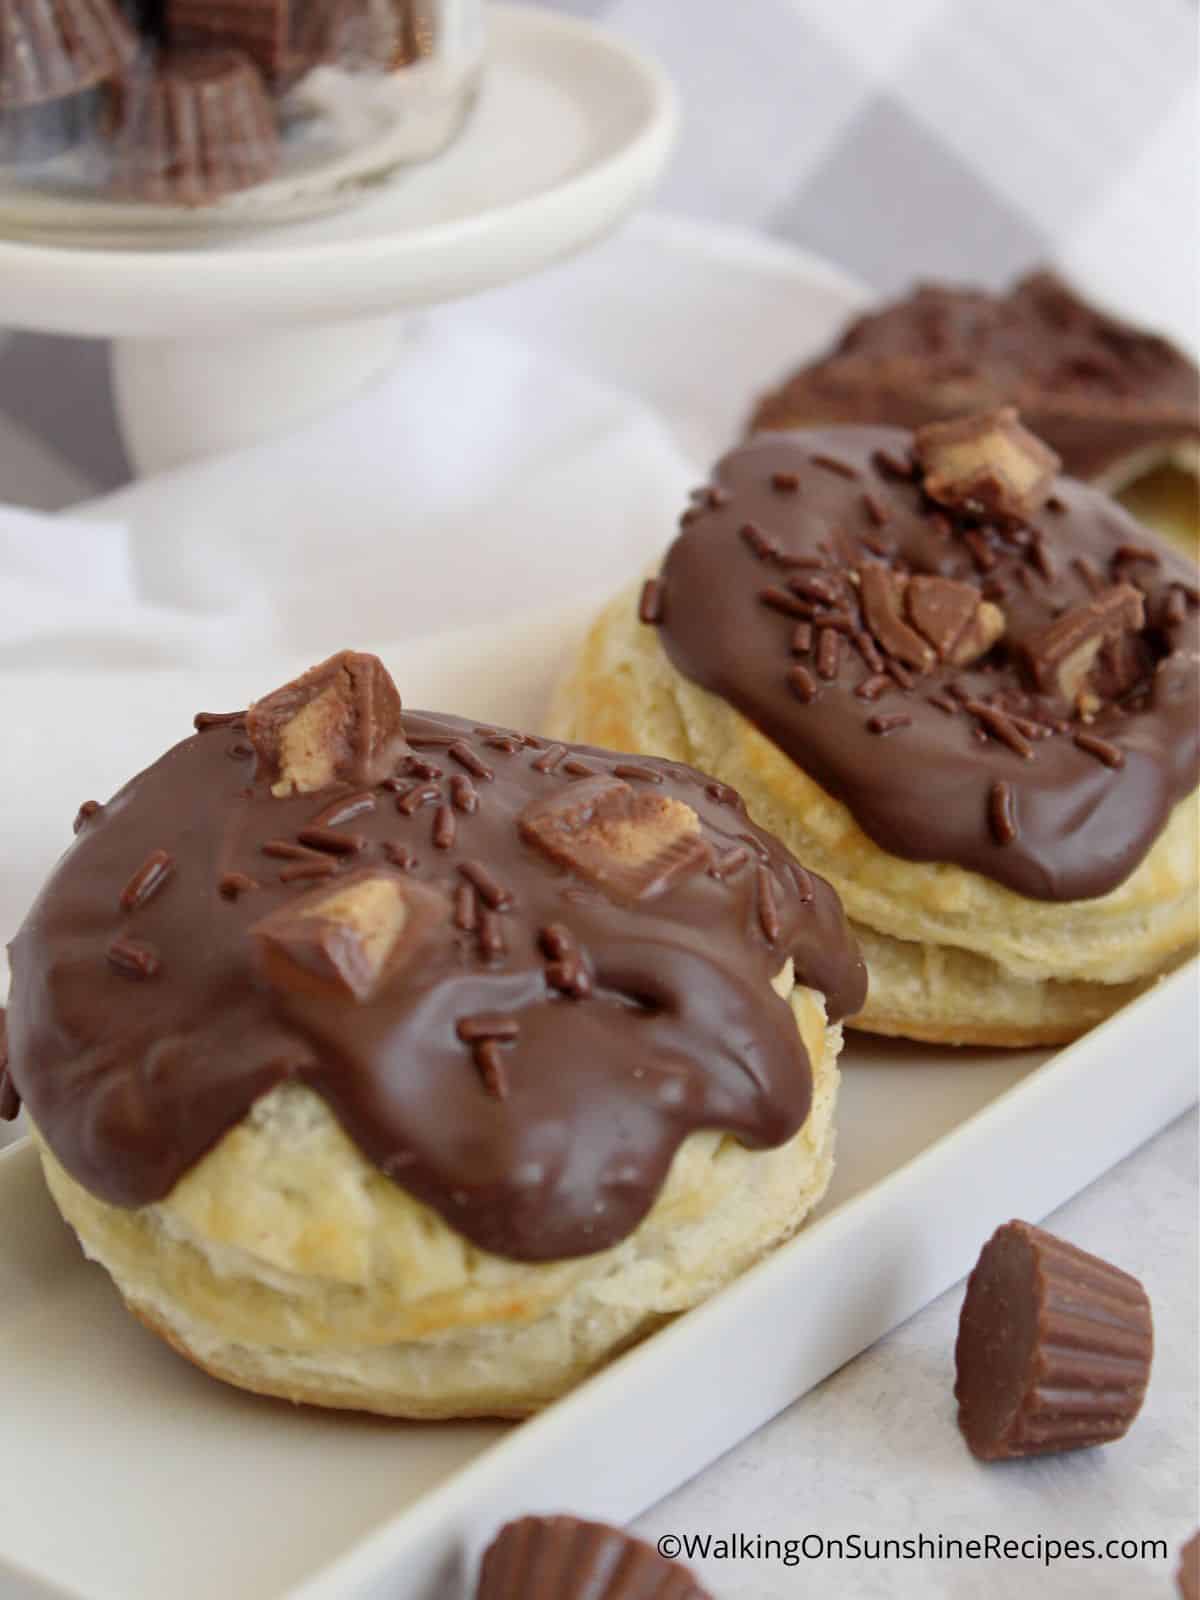 Chocolate Puff Pastry Dessert with Reese's Peanut Butter Cups.